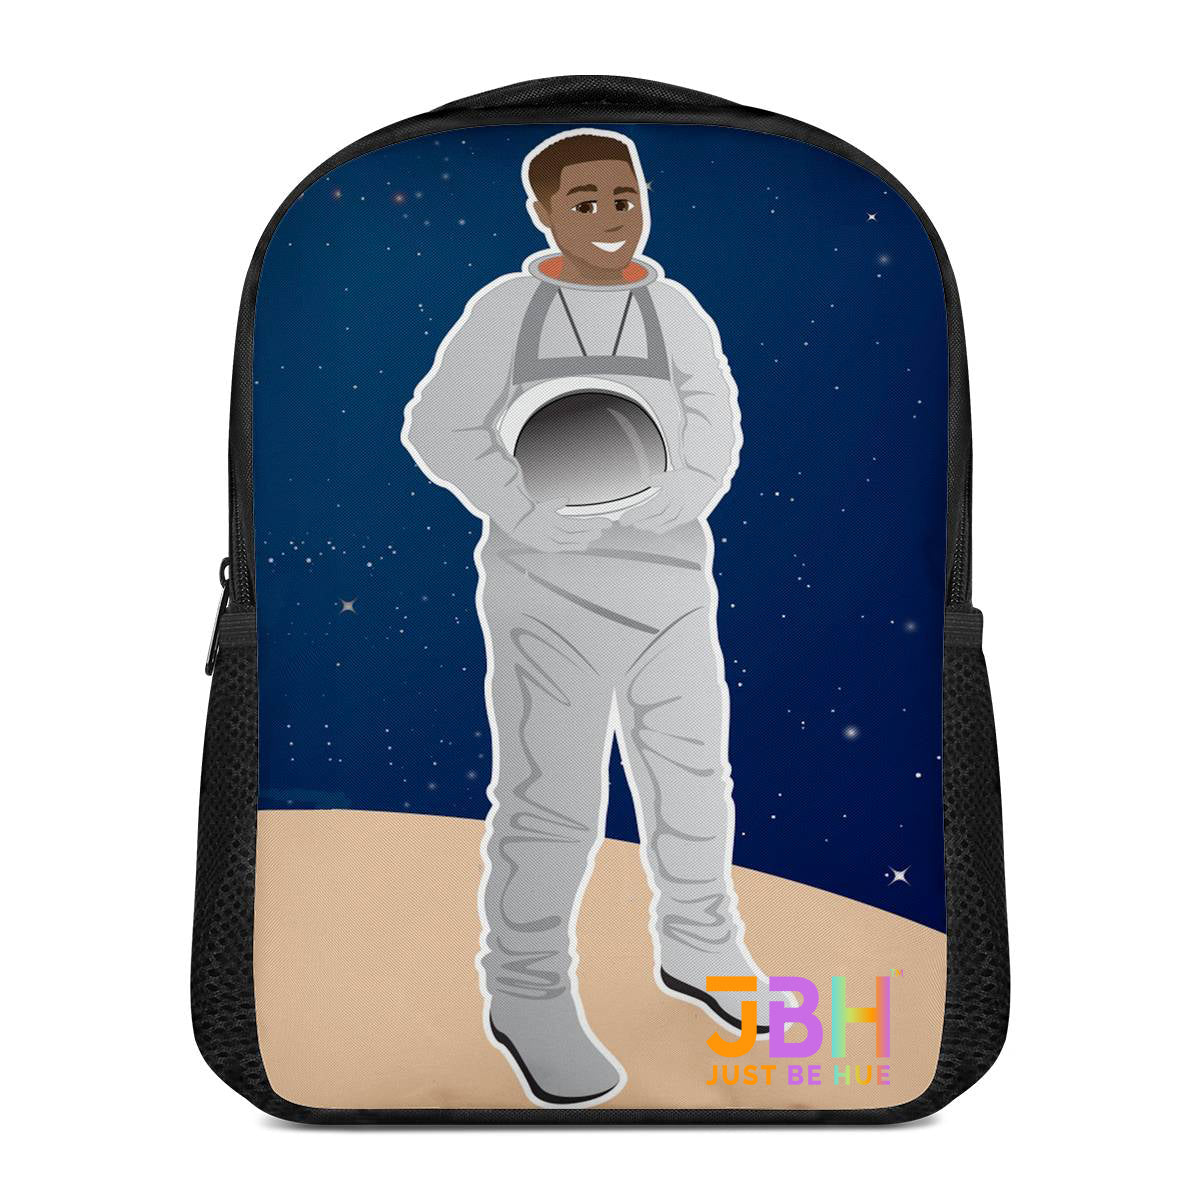 Alonzo The Astronaut Backpack